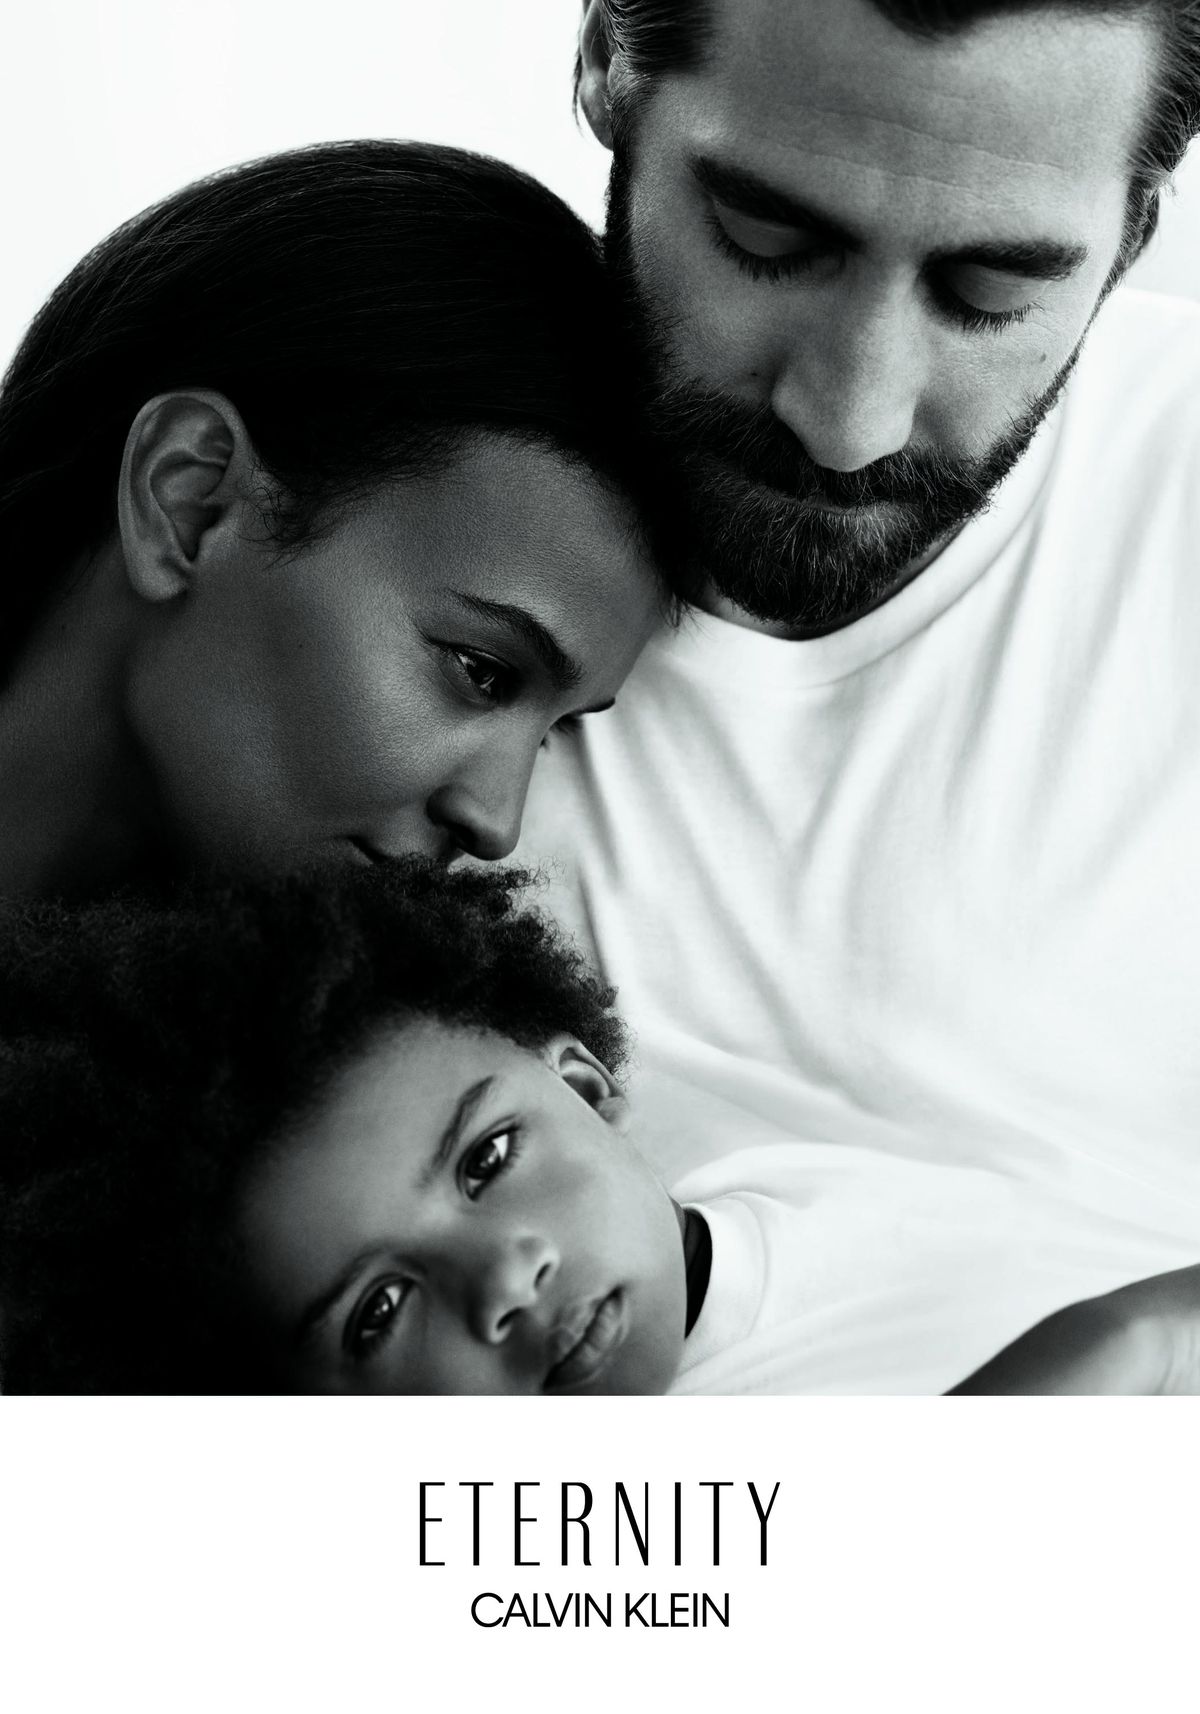 Jake Gyllenhaal, Liya Kedebe, and four-year-old actress Leila in an advertisement for Calvin Klein Eternity fragrance.